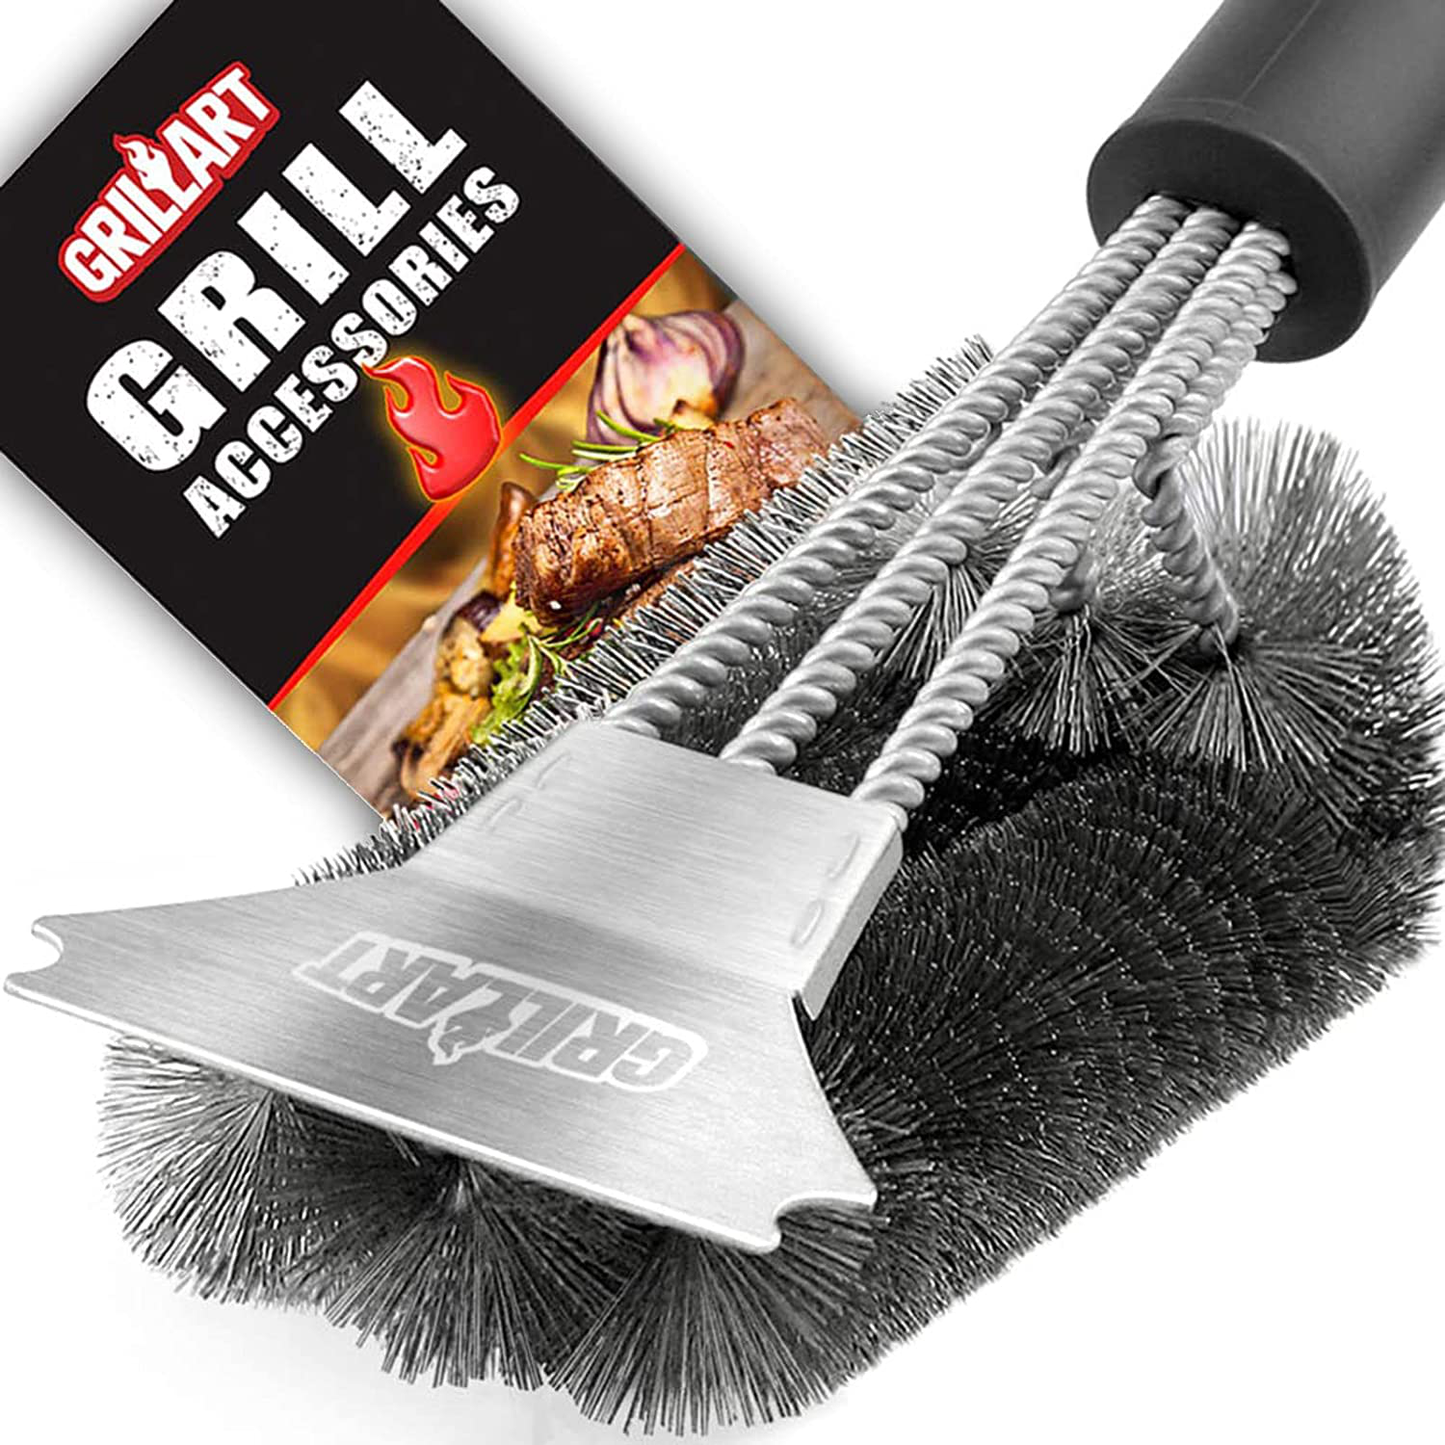 Grill Brush and Scraper - Extra Strong BBQ Cleaner Accessories - Safe Wire Bristles 18" Stainless Steel Barbecue Triple Scrubber Cleaning Brush for Gas/Charcoal Grilling Grates, Wizard Tool